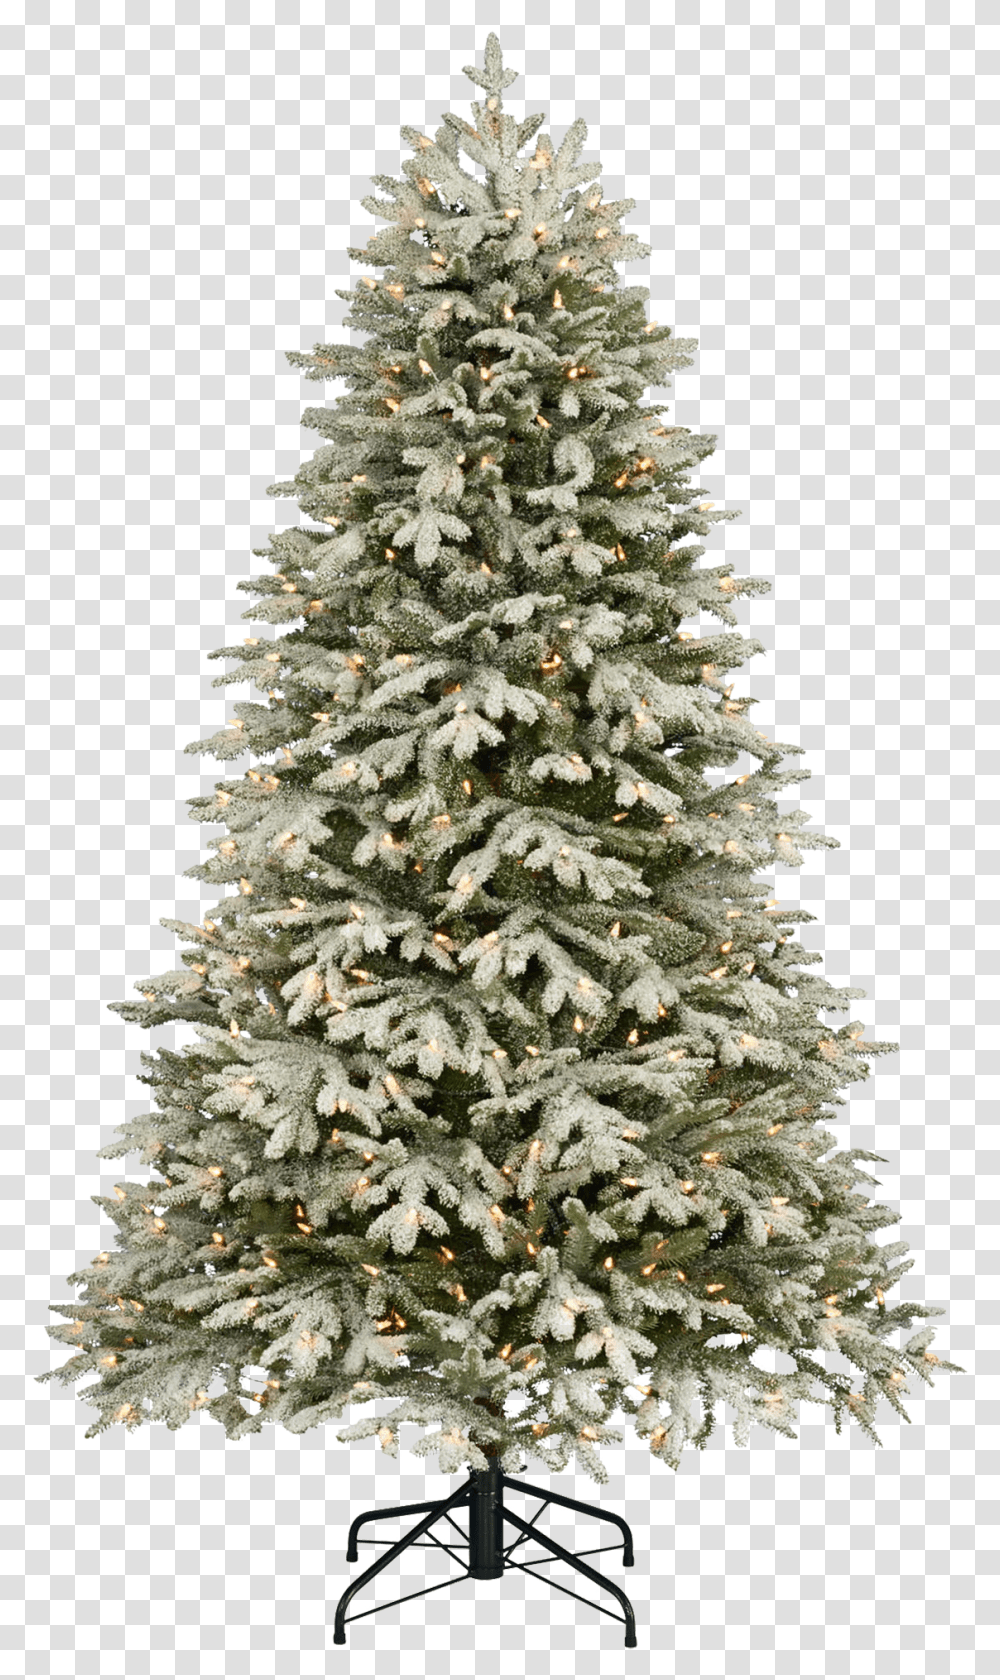 Christmas Tree Image Merry Christmas 2019 Words, Plant, Ornament, Pine, Fir Transparent Png